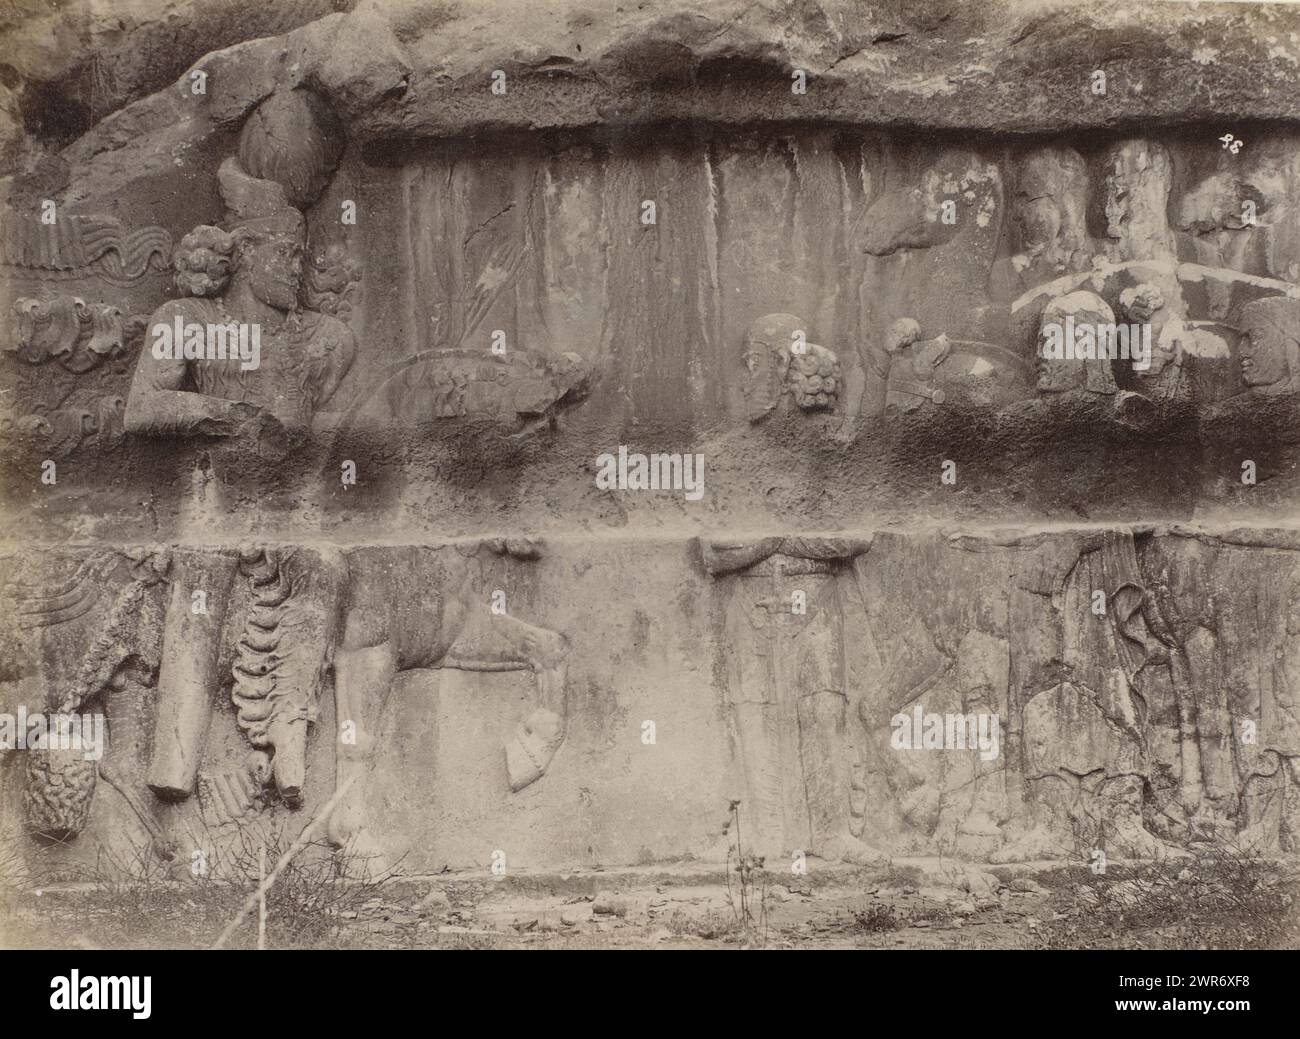 Relief IV in Bishapur, depicting the Sassanid king Bahram II and an Arab legation, Part of H. Dunlop's Travel Album with photographs of sights in Persia, Scotland, Germany, Russia, China and Canada., Antoine Sevruguin, Bishapur, c. 1880 - c. 1895, paper, albumen print, height 168 mm × width 224 mm, photograph Stock Photo